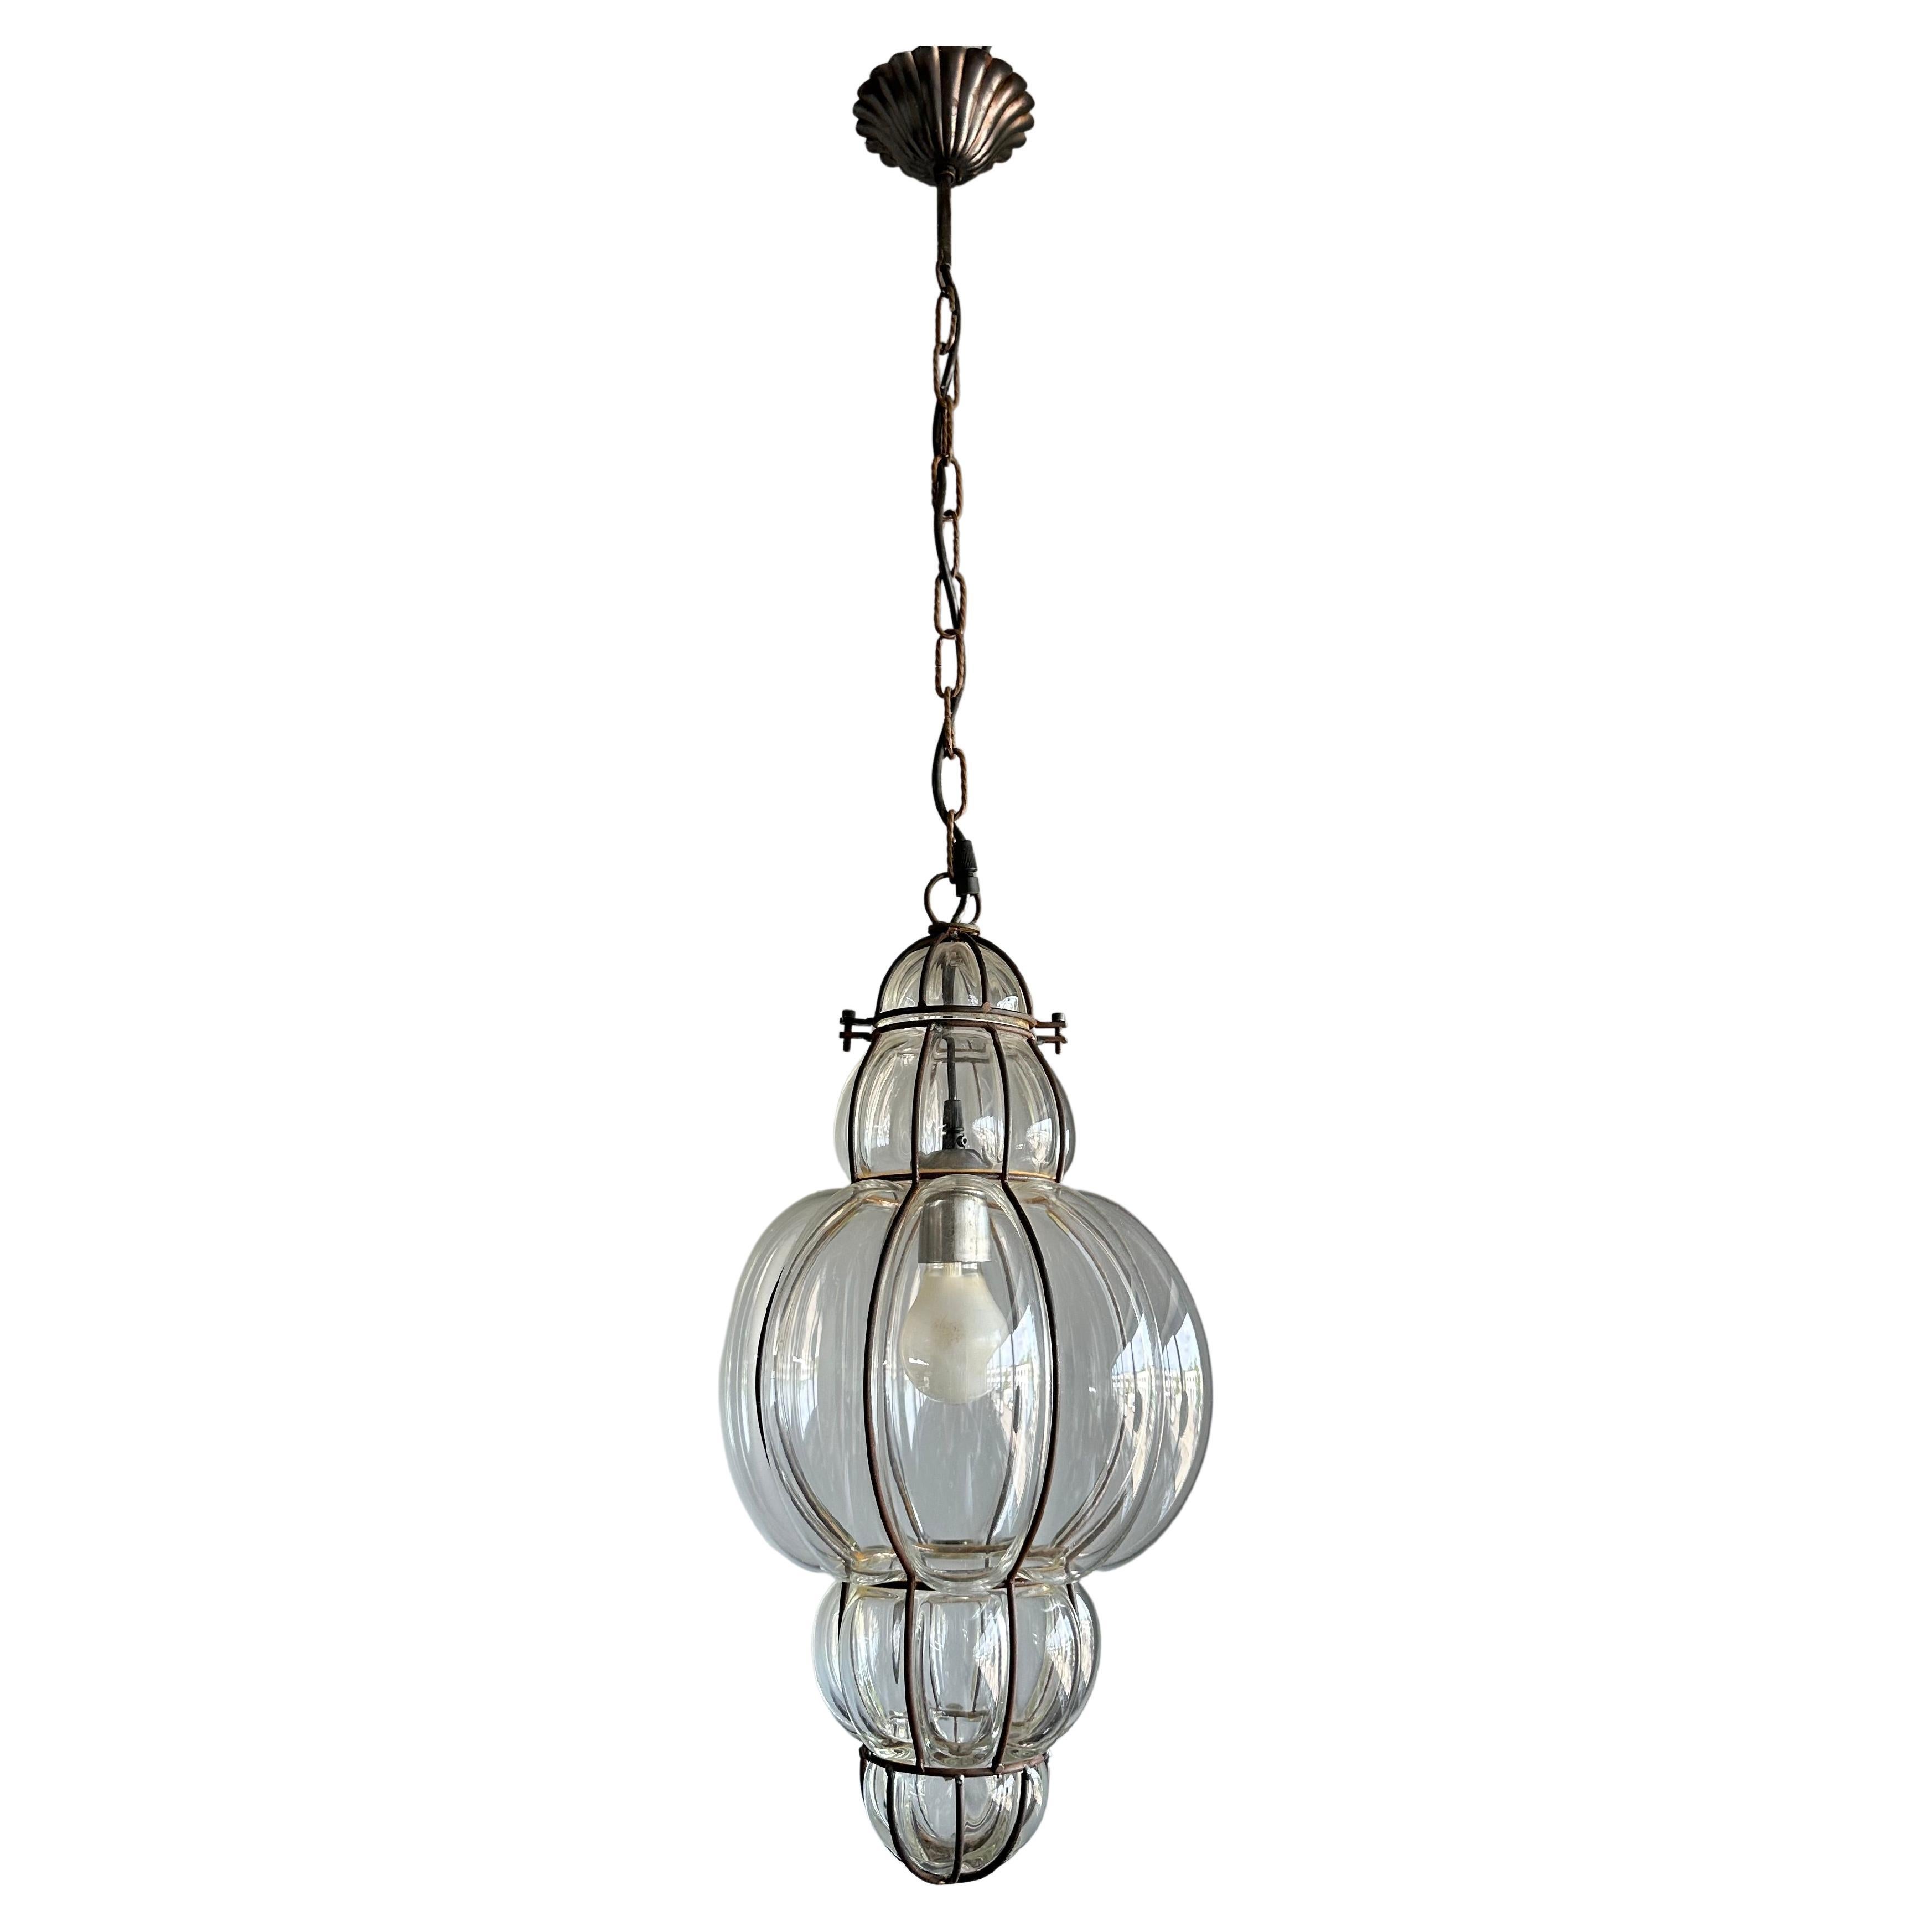 Great Shape Venetian Mouth Blown Glass in Hand Knotted Metal Frame Pendant Light For Sale